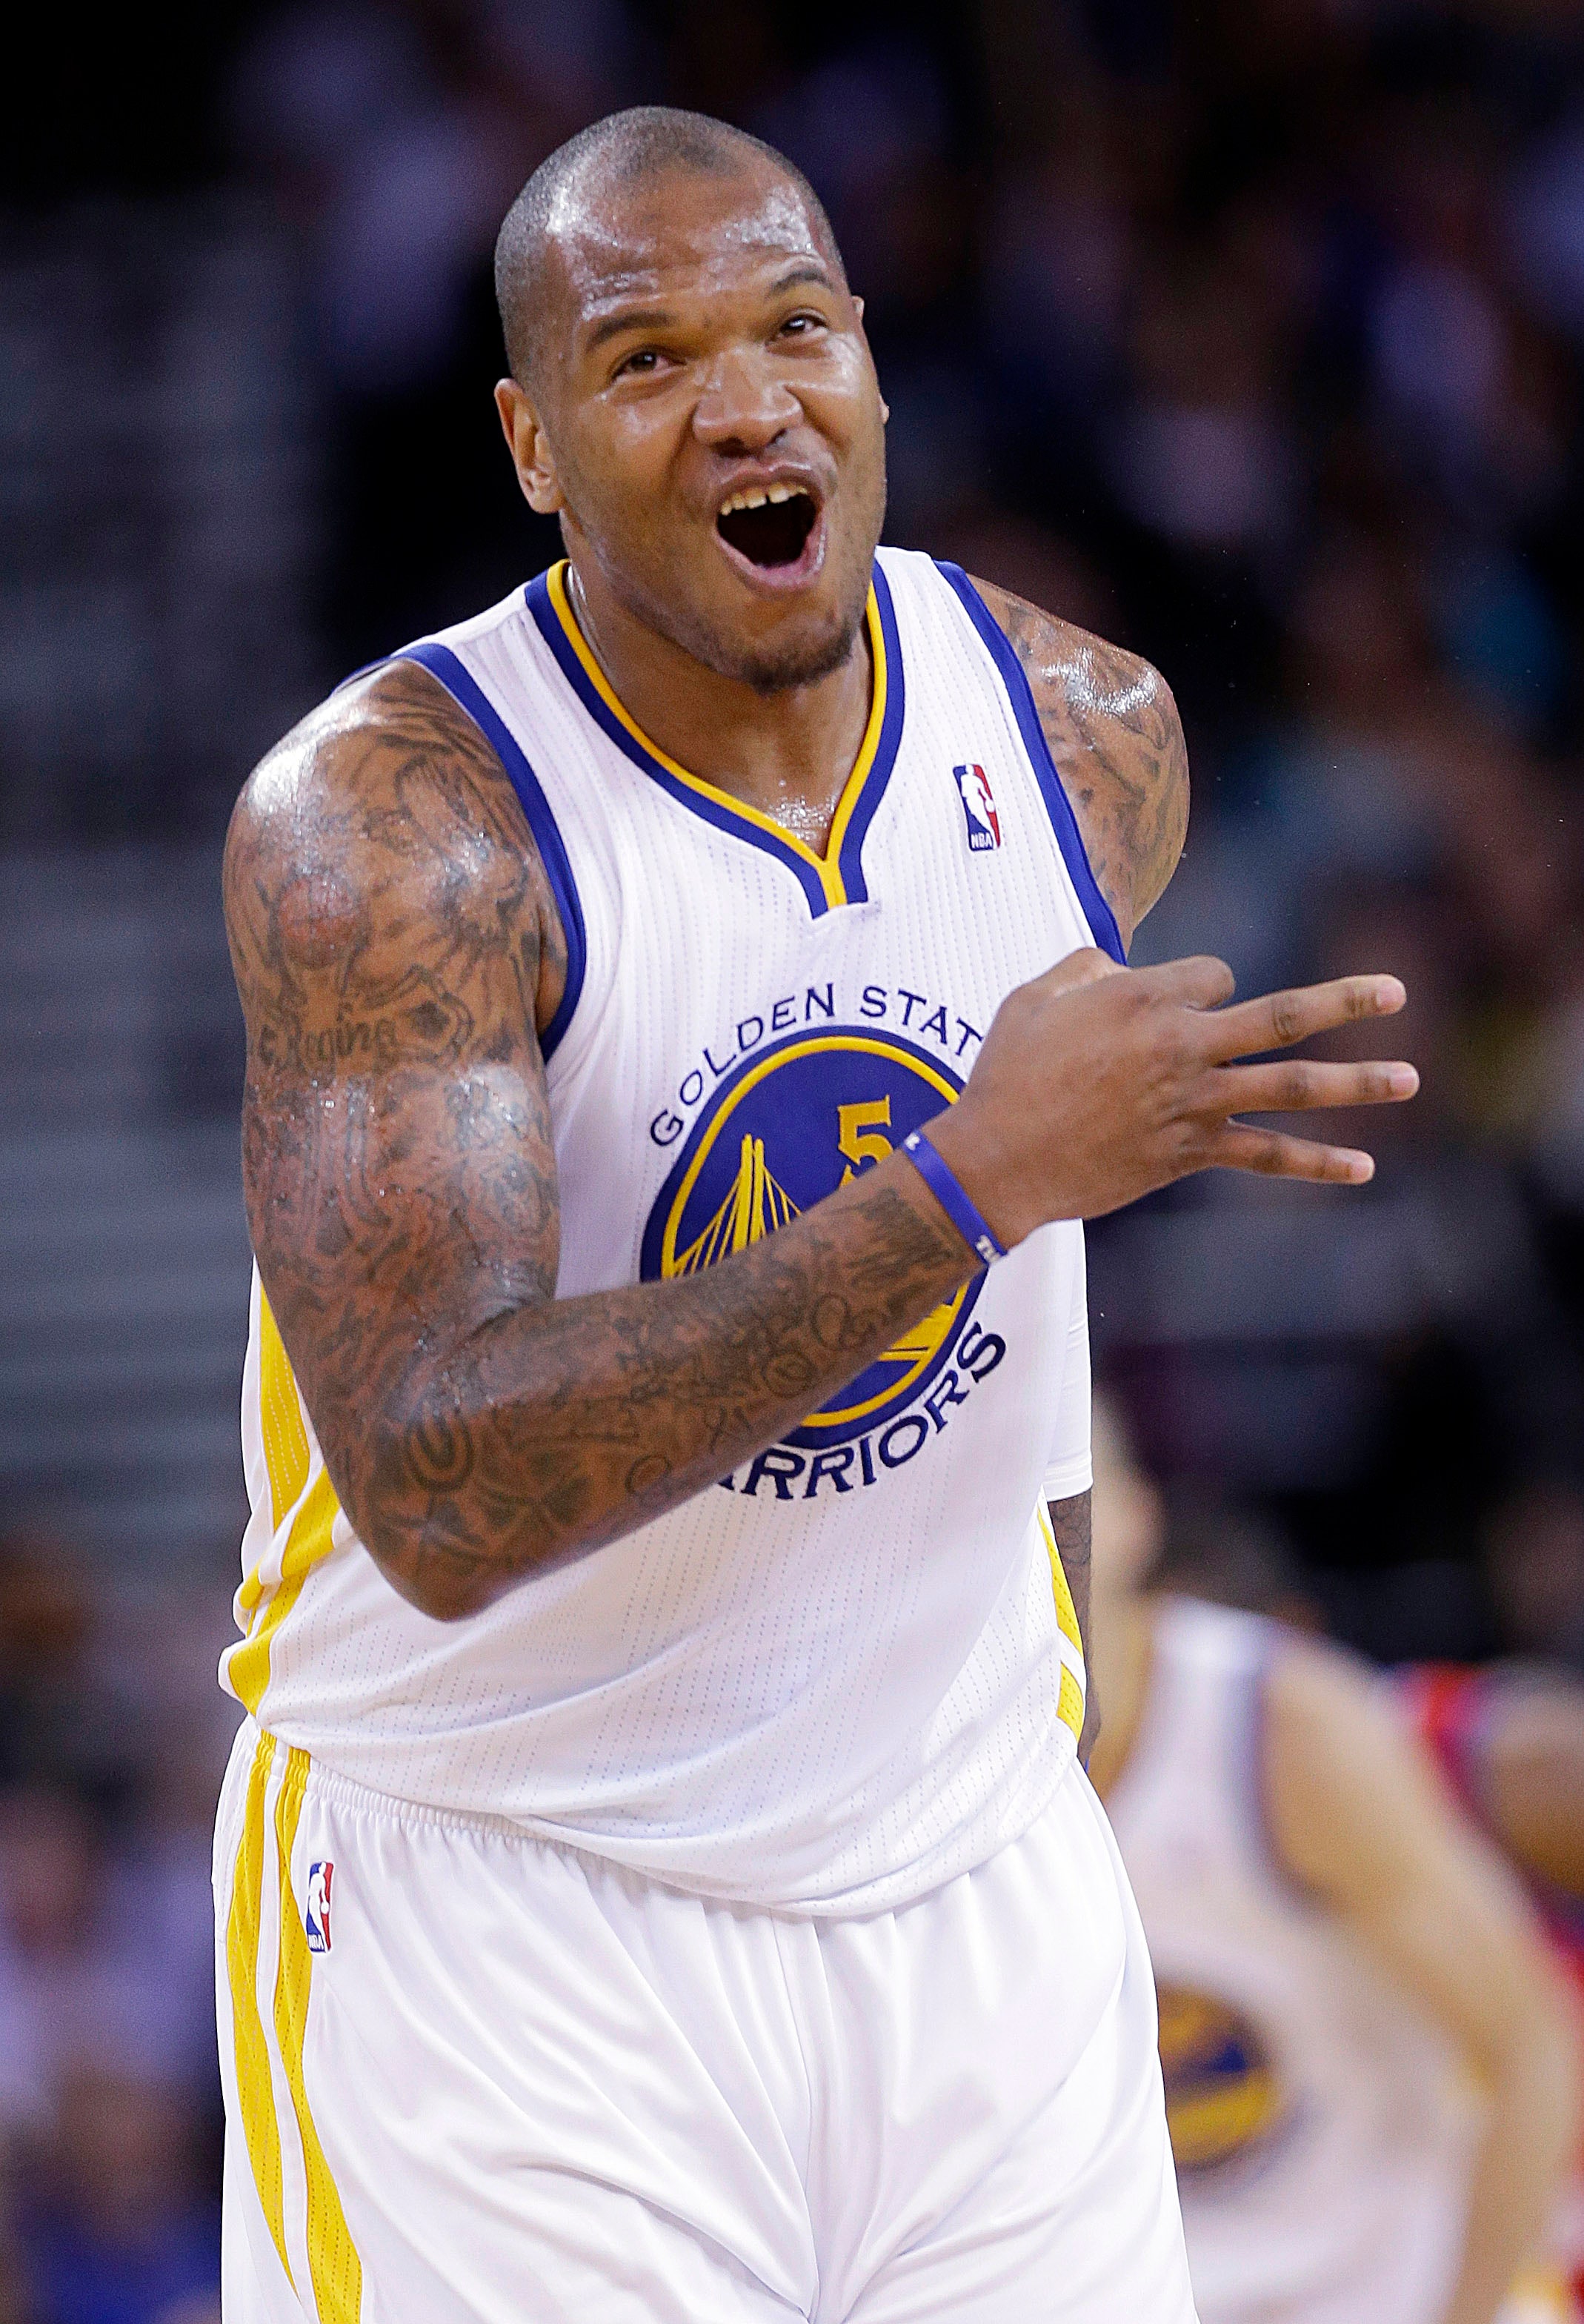 Marreese Speights scores career-high 32 points as Warriors hand 76ers another rout ...